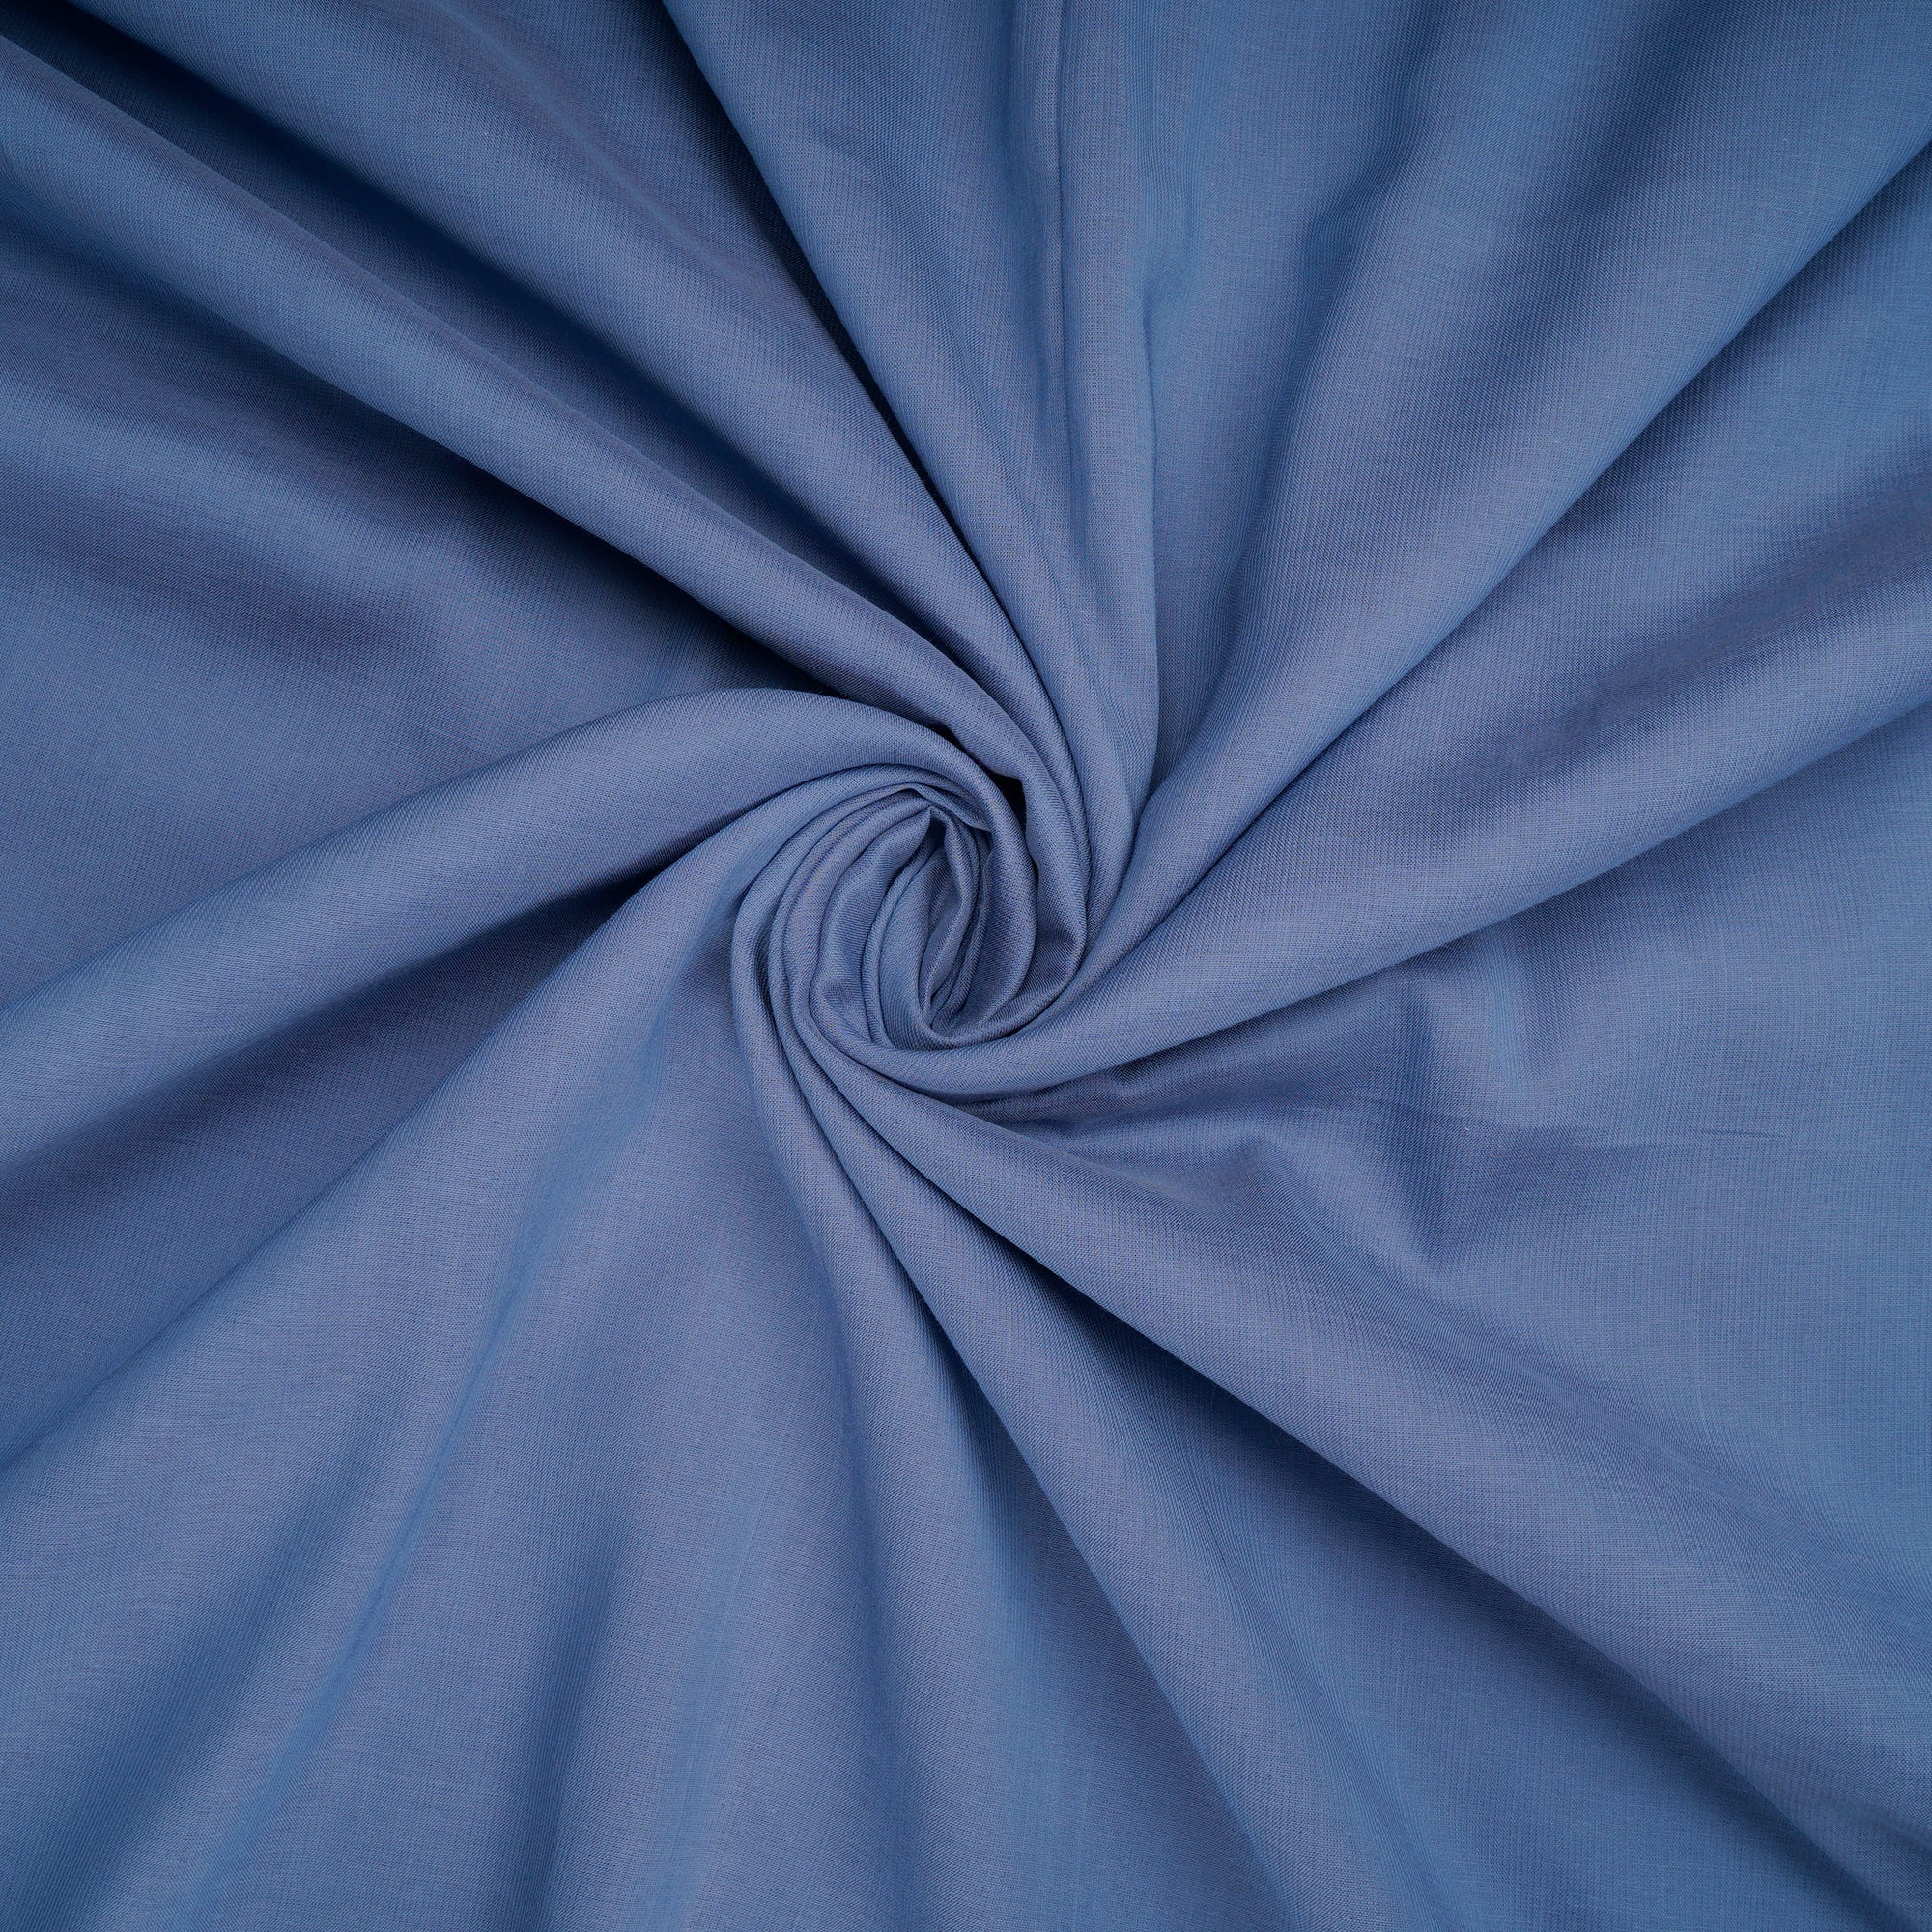 Bel Air Blue Viscose Terry Voile Fabric